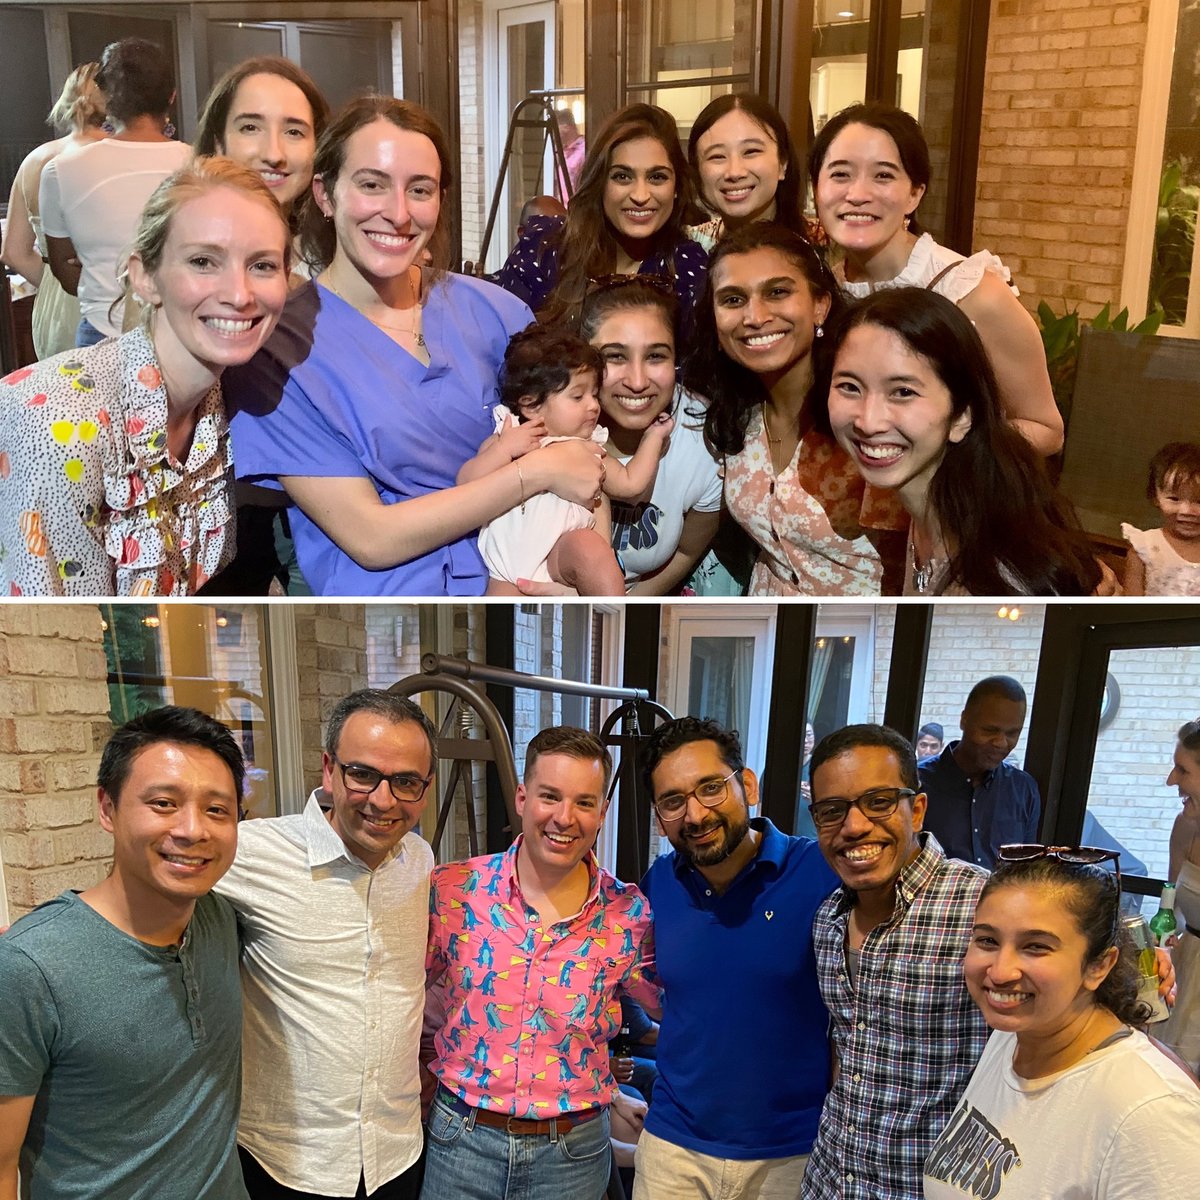 We had a great time tonight at our annual Welcome Social hosted by our awesome PD, Dr. Saurabh Chawla @chawla_gi! #PoopSquad 💩 #GITwitter #LiverTwitter @EmoryDeptofMed @emoryimchiefs